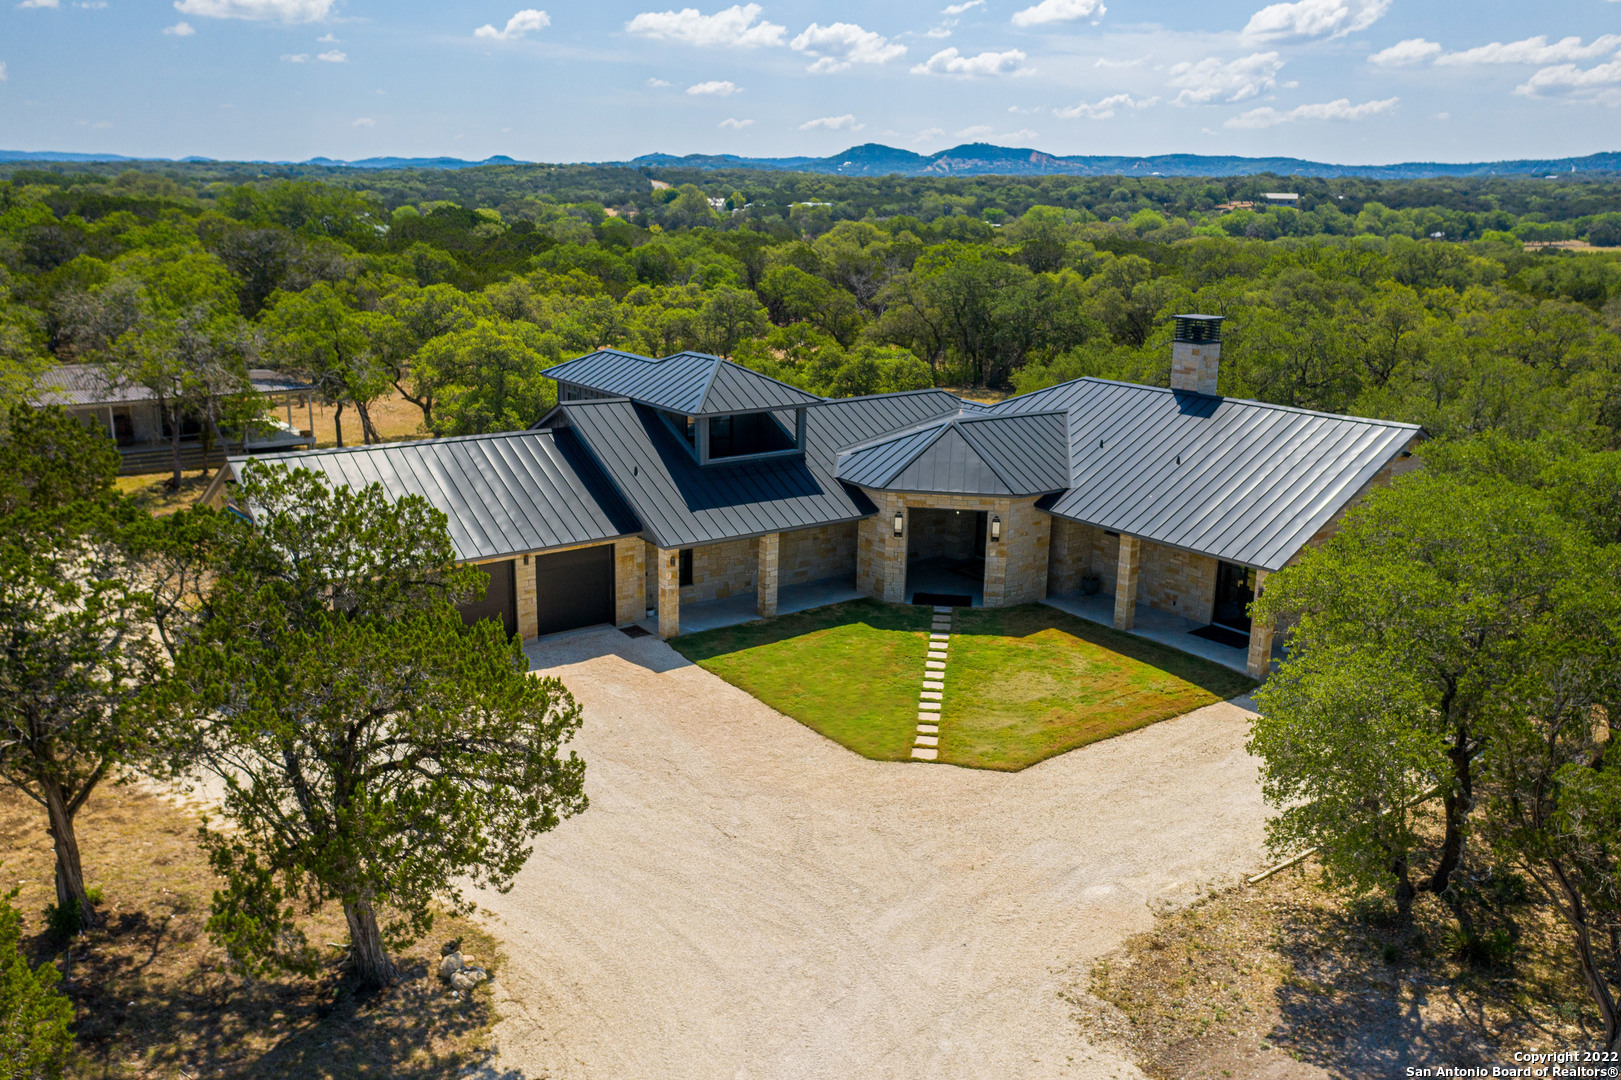 Welcome to Boot Ranch, located in the great Texas hill county.  This parcel of land is a diamond in the rough! It is hard to find this amount of land with as much flat terrain in the hill country as this parcel offers you.  The land has been cleared to highlight the countless oak and cedar trees on the property that provide ample shade and privacy.   The home was custom built and has been planned for everything you may want. If you desire attention to detail, exquisite upgrades, and the feel of luxury in your home, look no further.  Enjoy all of the natural light throughout the home with all the large custom windows and doors.  The front and back doors are custom built and cost over $12,000 each.  The master bedroom features a large spacious sleeping area highlighted by two separate bathrooms and large walk in closets.  The bathroom to the left features a large walk in shower and is pre-plumbed for a steam machine.  The bathroom to the right features a large soaking tub.  Countertops throughout the home are leathered granite which further highlights the exquisite detail brought into the home.  The first island in the kitchen is capped with striated marble with waterfall sides.  Each secondary bedroom has their own full bathroom with large closets.  Before you make your way upstairs you will find the family room.  The door in the back of the room will take you to a hidden room that you can turn into a safe room, gun room, or more.  The barn door for the family room is over 100 years old and was actually the front door of an old church in Comfort.  It was saved from being destroyed before the church was torn down.  As you make your way upstairs to a tranquility room which is great for yoga, working out, and more, you will find your own private balcony that overlooks the property.  While enjoying the outdoors, keep an eye out for deer, wild peacocks, and other native wildlife.  When it is time to get closer to nature, you can relax on the oversized back covered patio.  This patio is also pre plumbed and wired for an outdoor kitchen and speaker system.  The three car garage features ample space for your vehicles and outdoor toys.  It is pre plumbed for a water softener and an in home vacuum system.    As you stroll through the property make sure you find your way down to the creek bed. Down there you will find a picnic table where you can eat your lunch while shooting your pistol and rifles at the targets that are set up.  When water runs through the creek you can sit there and watch the waterfalls cascade off of the rock formations.  There is also an 18 ft hole that makes for a perfect swimming pool. The creek photos provided were taken two years ago when water was running through the creek. The property is fenced on all four sides and features two gates to access the property.  Nearly all of the fence has the high game fencing, only a small section is barbwire.  If you are looking for a wonderful home, privacy, luxury, and a desire to connect with nature, this home is what you need.